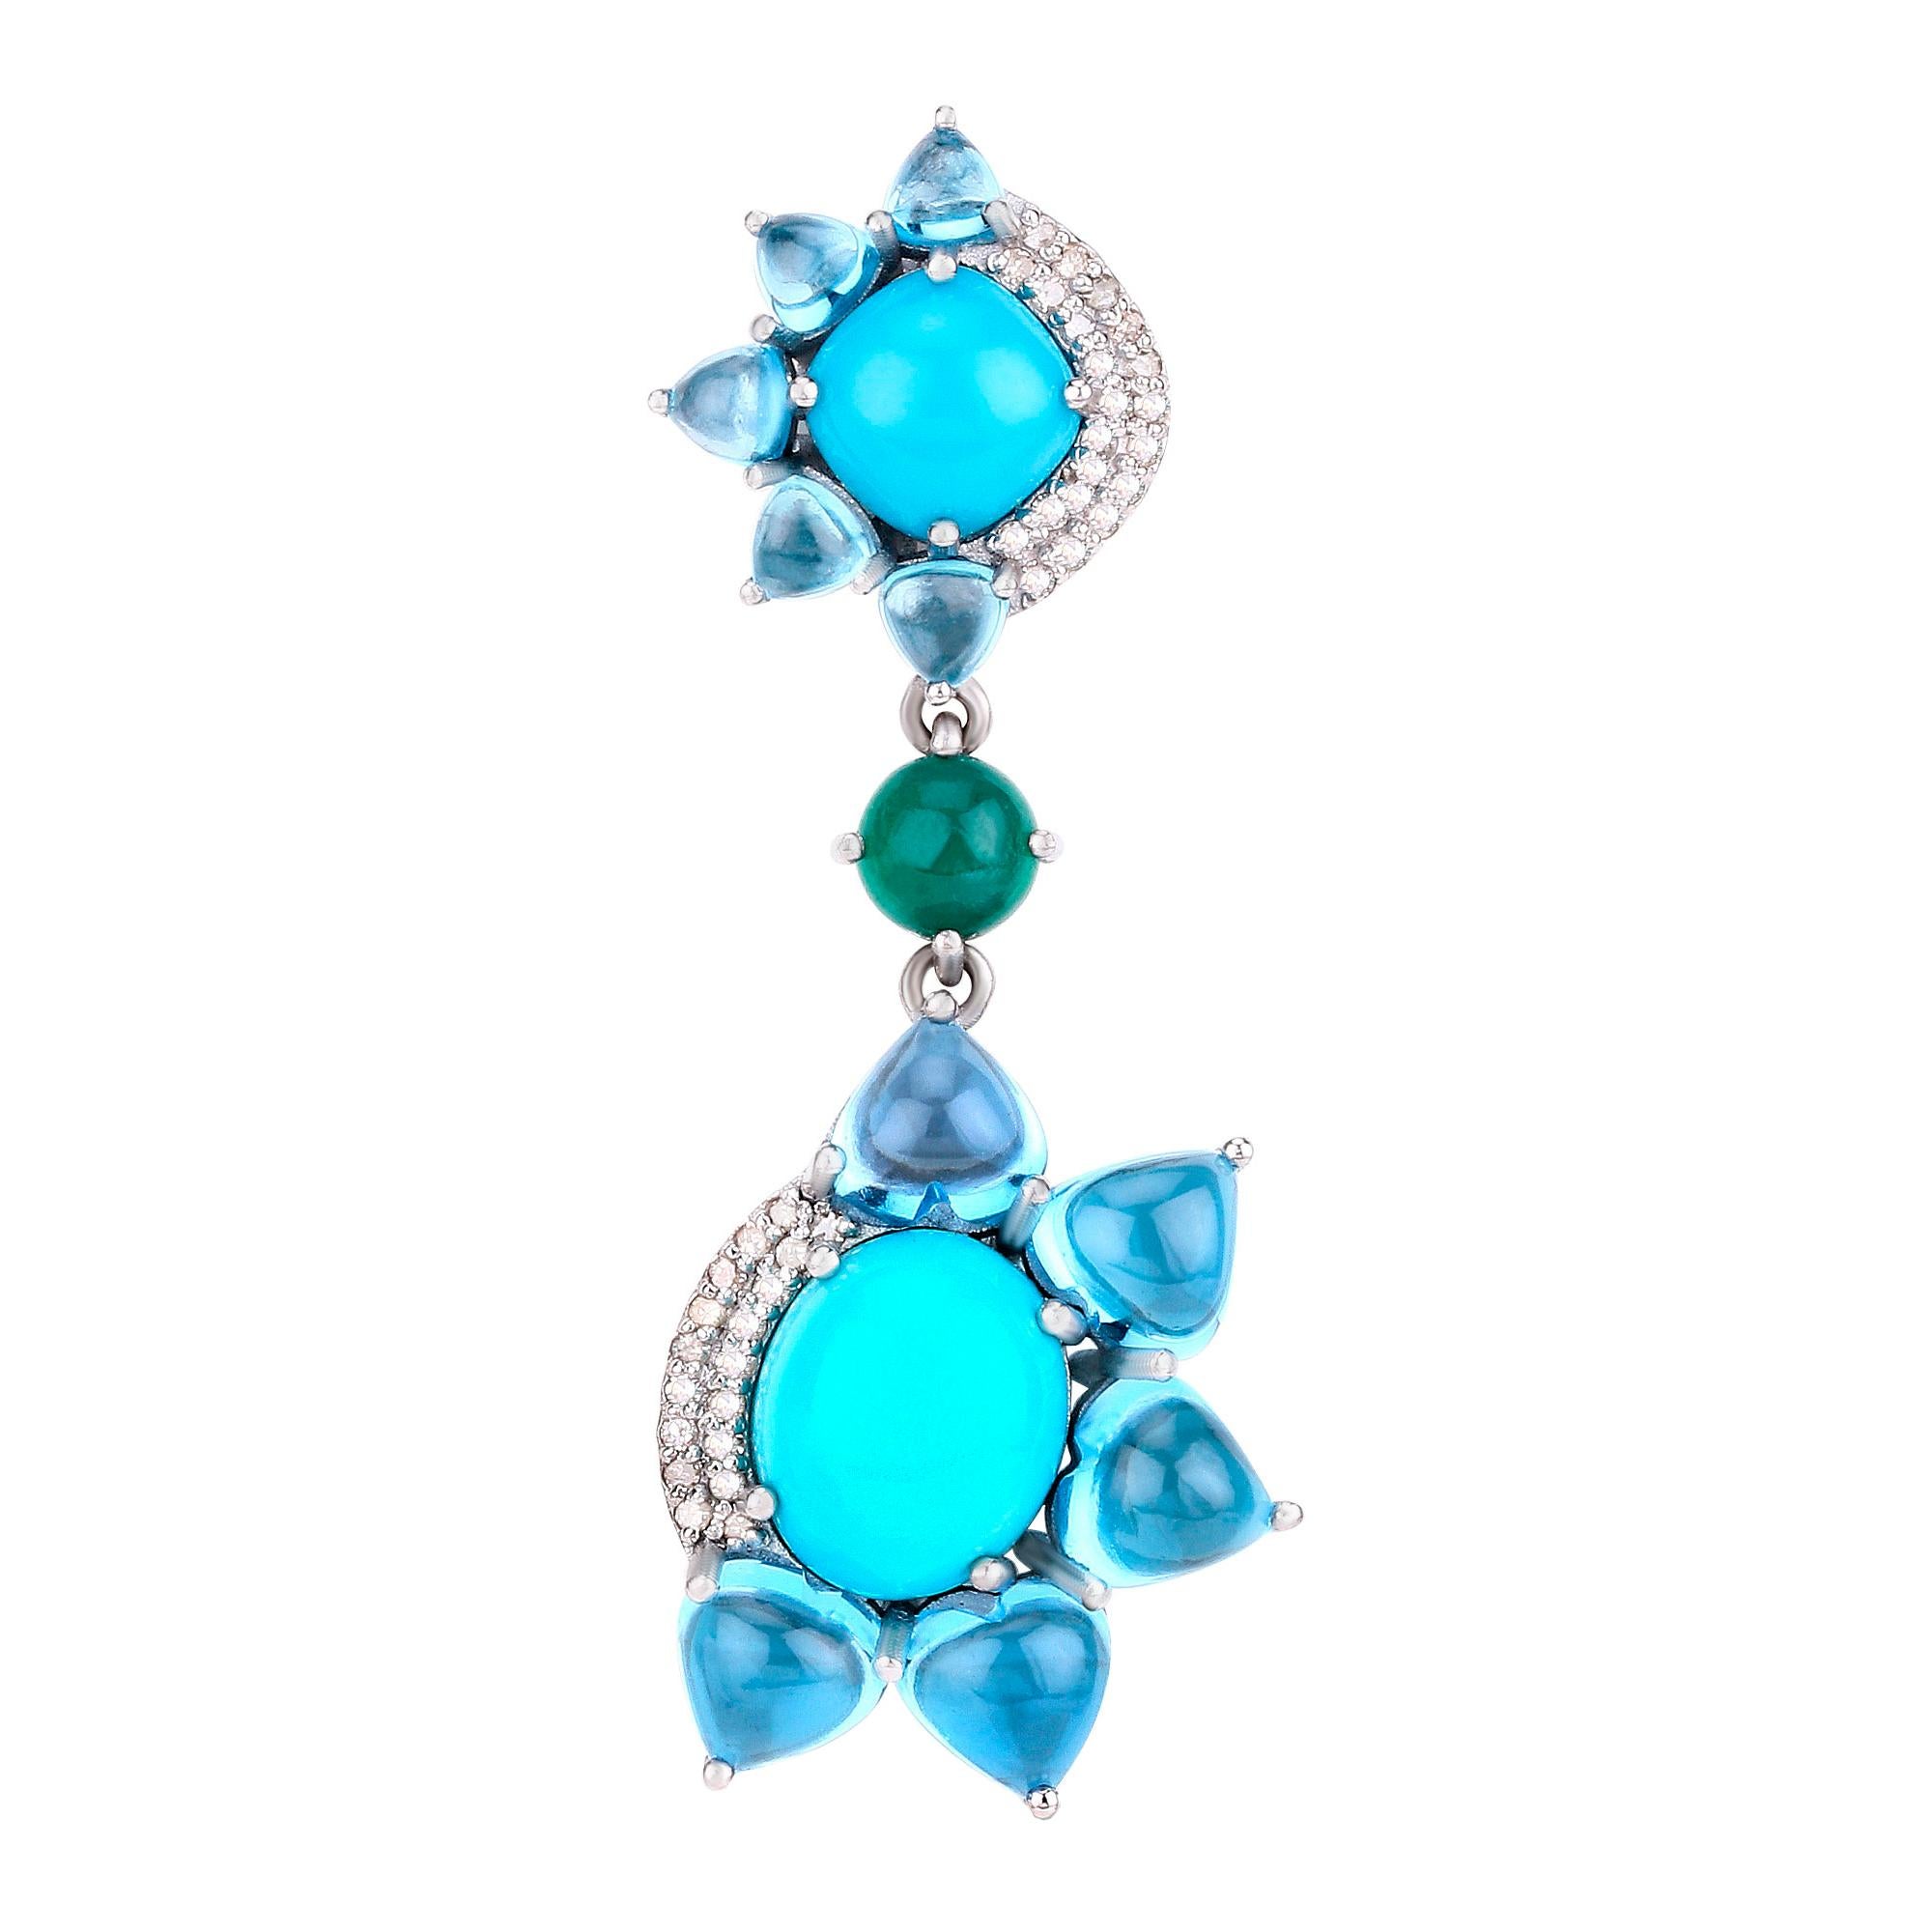 Mixed Cut Gemstones Earrings Topaz Emerald Turquoise Diamond 38.95 Carats Sterling Silver For Sale